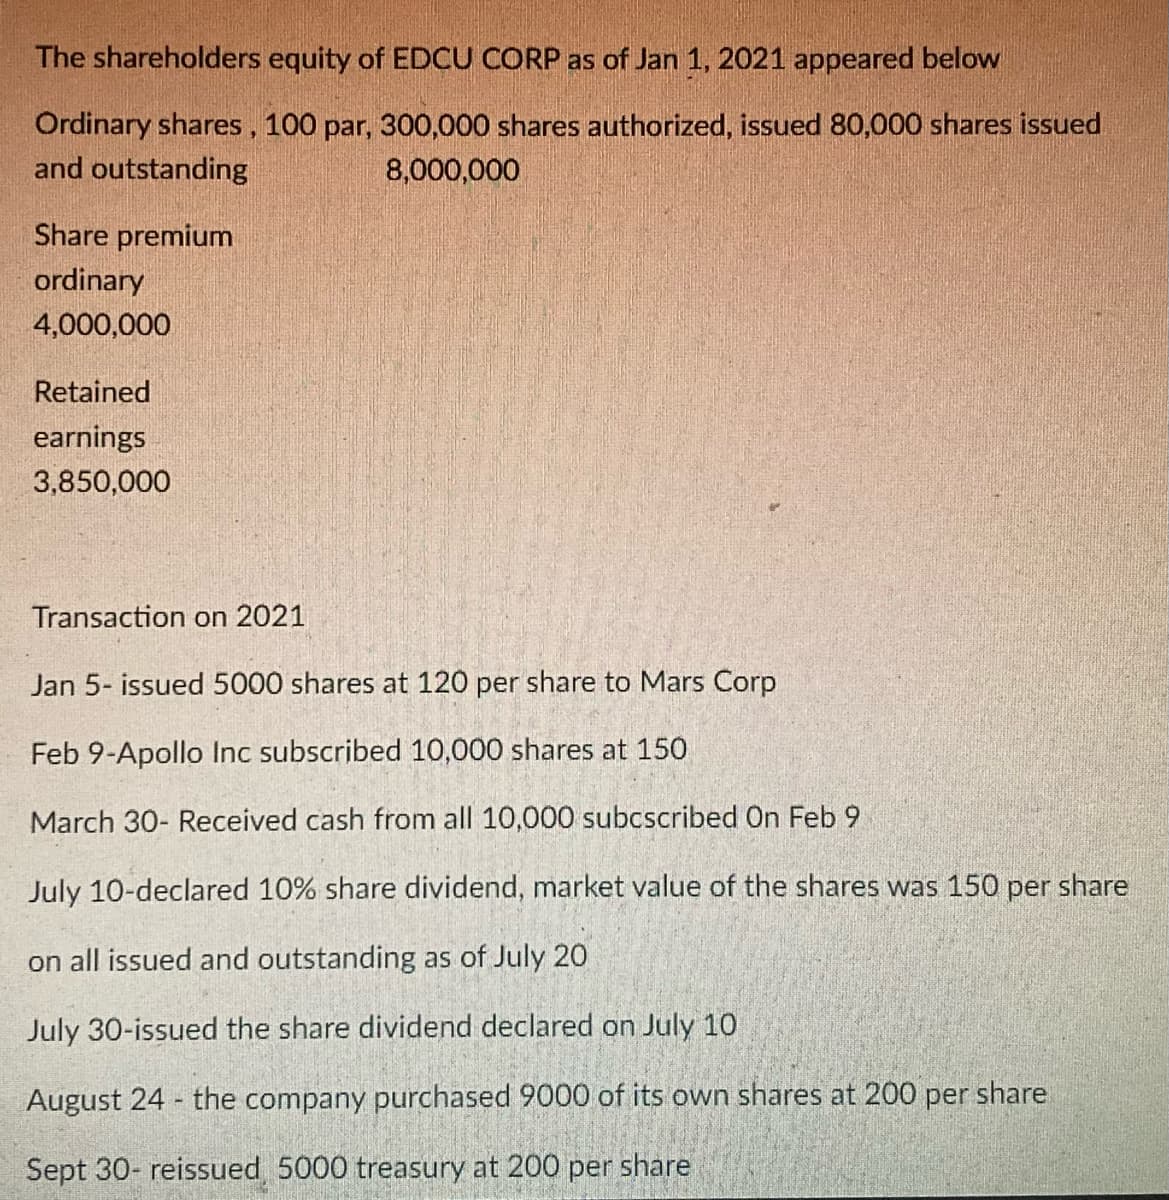 The shareholders equity of EDCU CORP as of Jan 1, 2021 appeared below
Ordinary shares, 100 par, 300,000 shares authorized, issued 80,000 shares issued
and outstanding
8,000,000
Share premium
ordinary
4,000,000
Retained
earnings
3,850,000
Transaction on 2021
Jan 5- issued 5000 shares at 120 per share to Mars Corp
Feb 9-Apollo Inc subscribed 10,000 shares at 150
March 30- Received cash from all 10,000 subcscribed On Feb 9
July 10-declared 10% share dividend, market value of the shares was 150 per share
on all issued and outstanding as of July 20
July 30-issued the share dividend declared on July 10
August 24 the company purchased 9000 of its own shares at 200 per share
1.
Sept 30- reissued 5000 treasury at 200 per share
